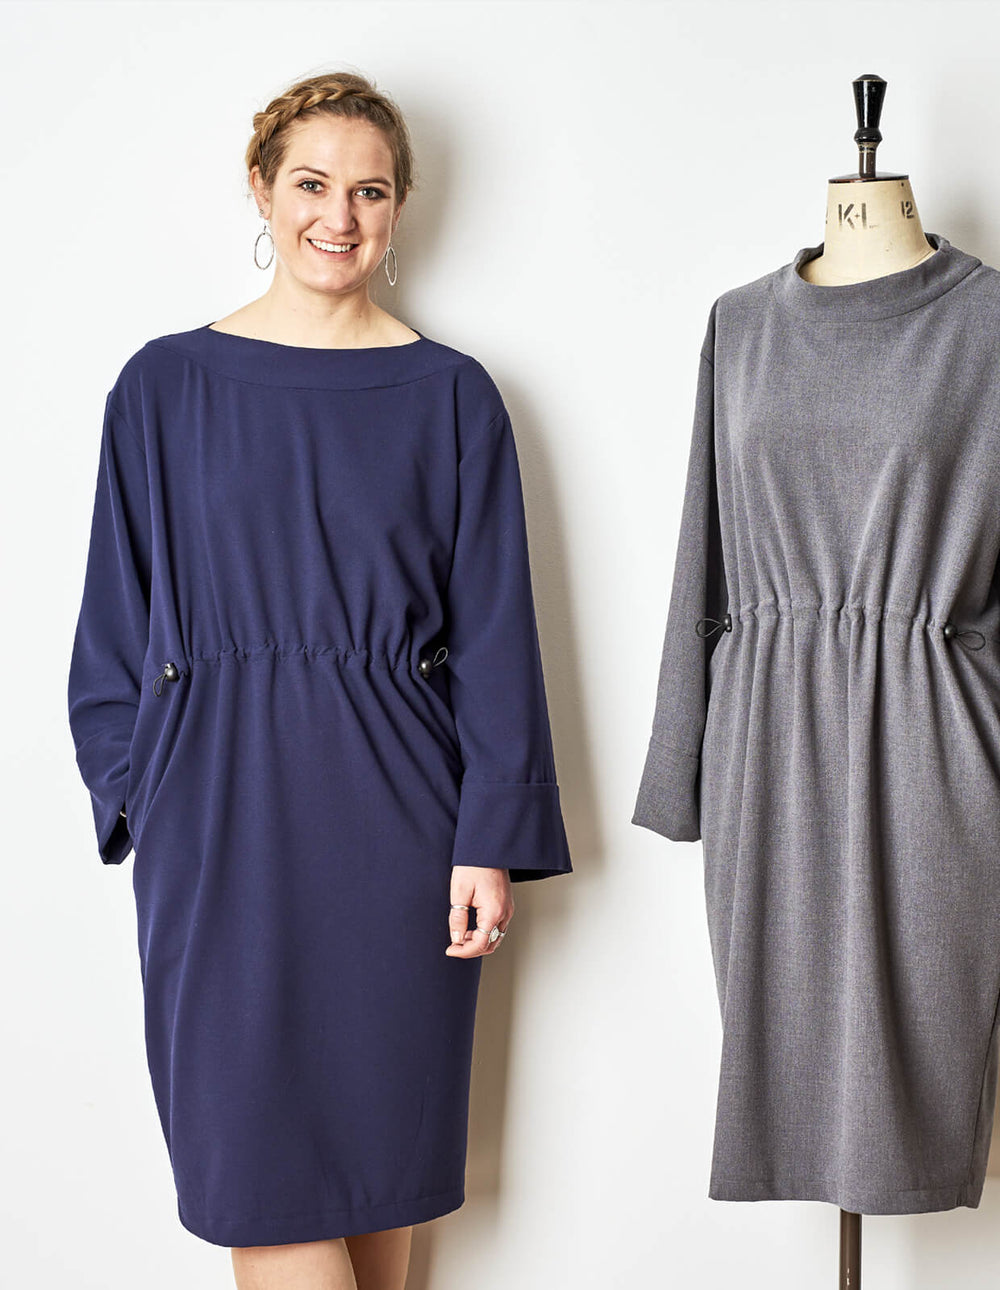 Woman wearing the Relaxed Drawstring Dress sewing pattern from The Maker's Atelier on The Fold Line. A dress pattern made in light to medium weight fluid woven fabrics, featuring a relaxed fit, long sleeves, drawstring waist, full length wide sleeves with